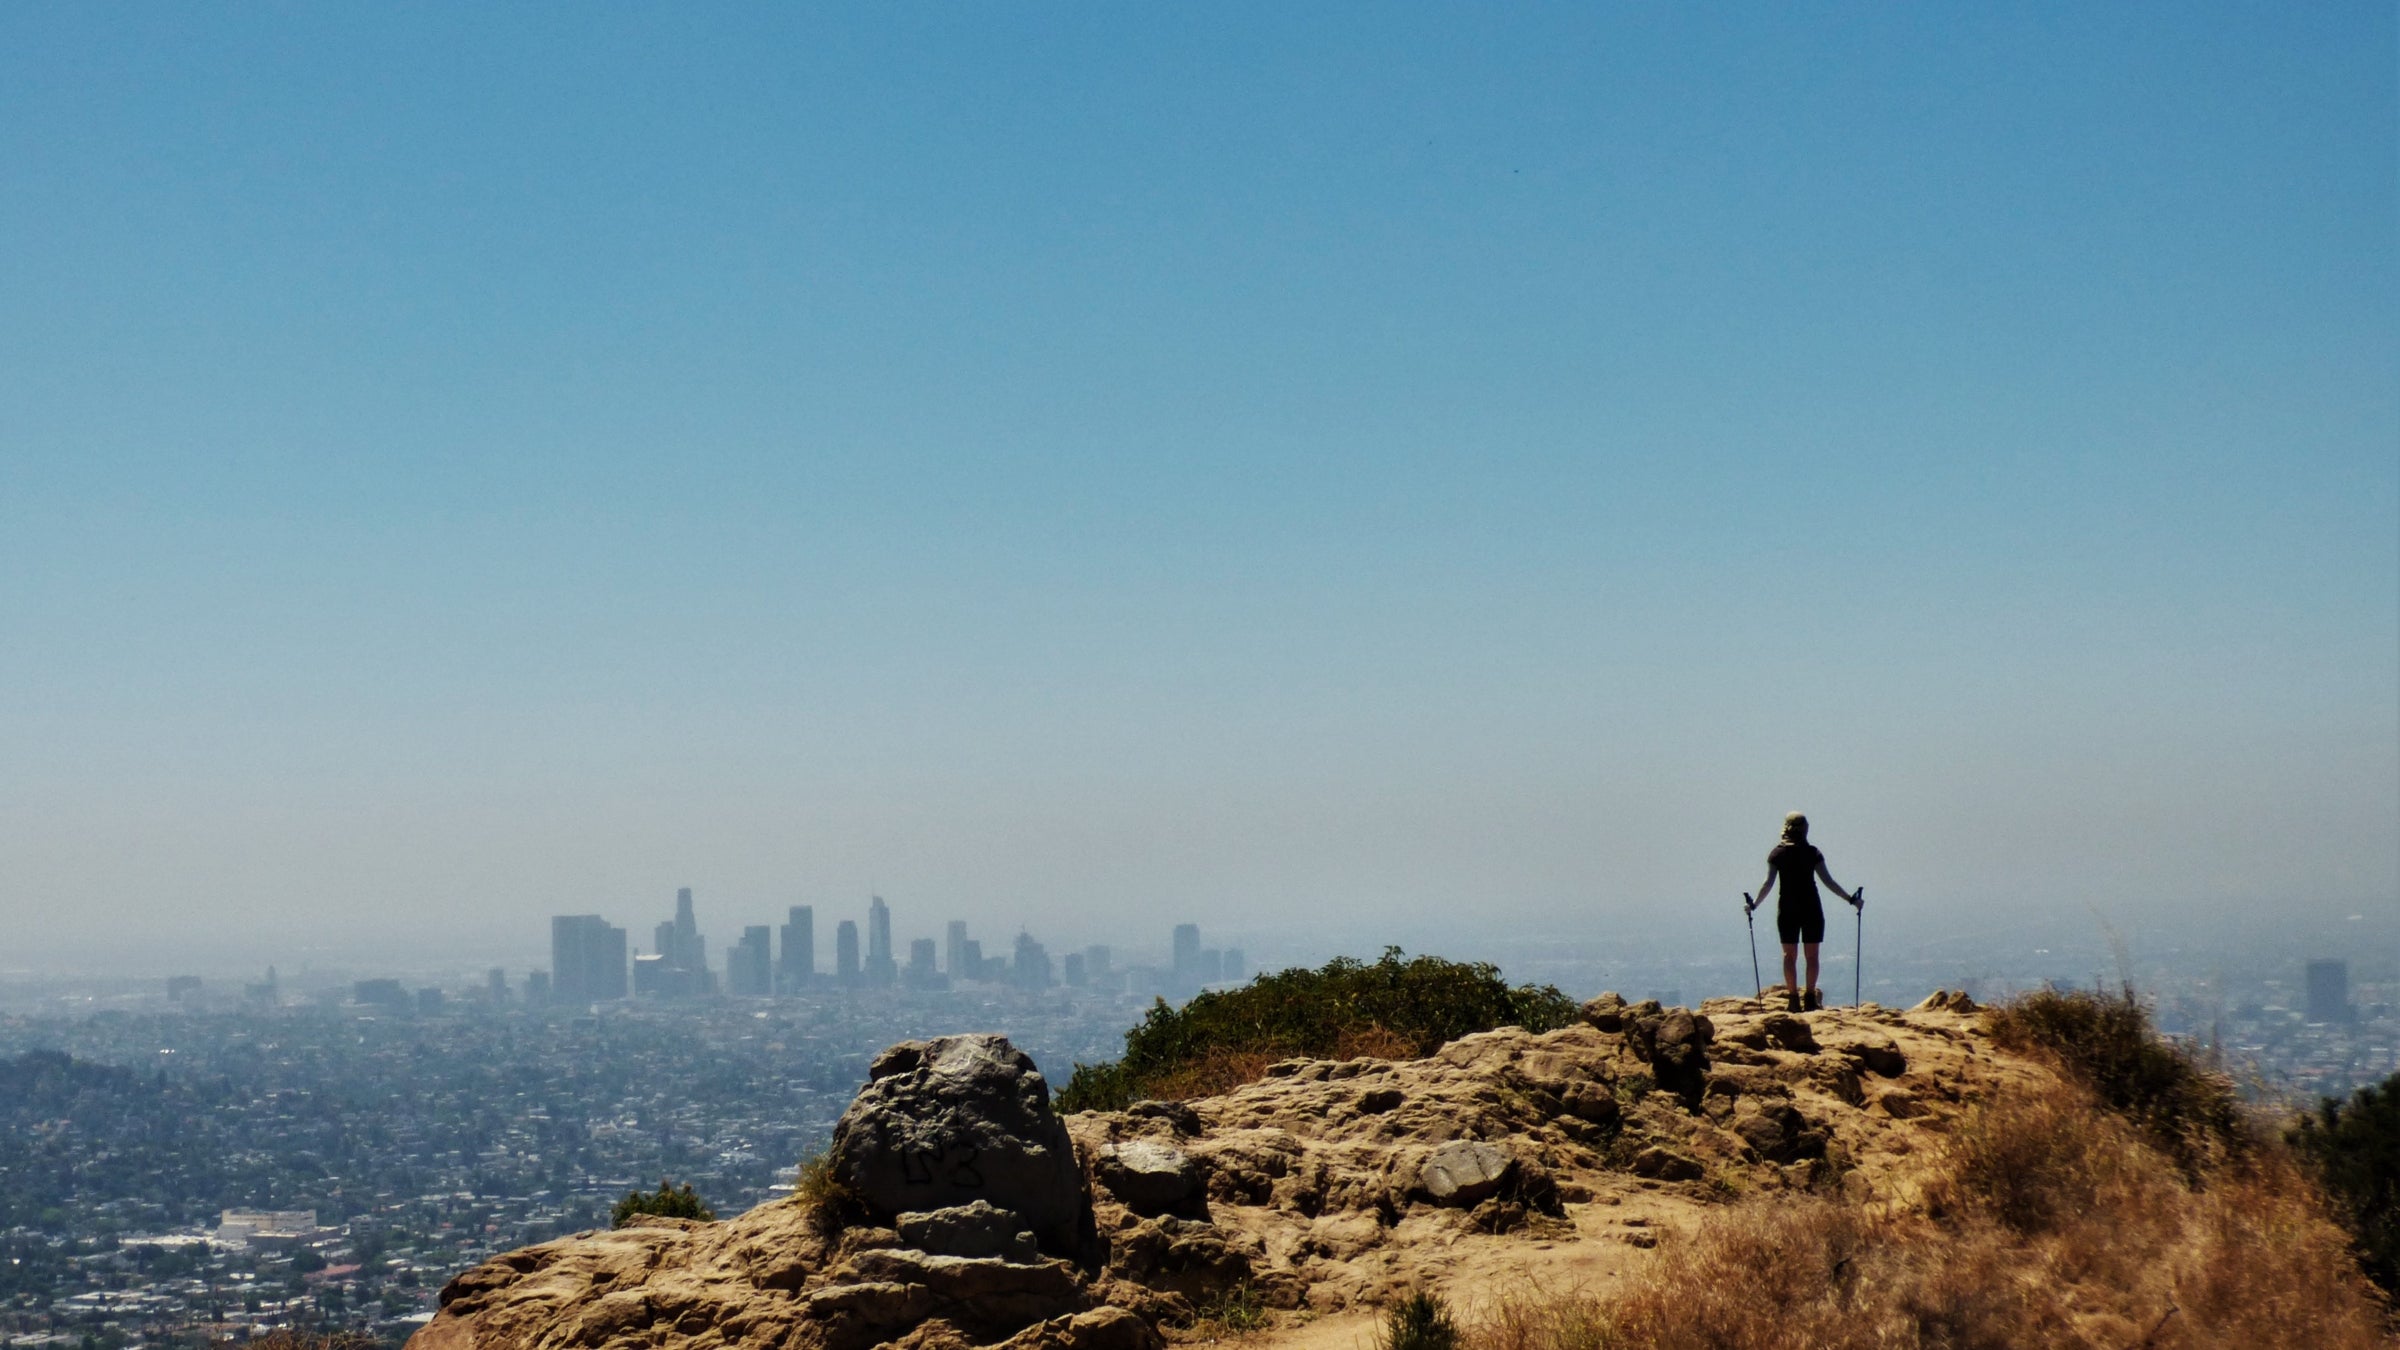 6 Best Hikes And Trails in L.A. to Get Outdoors and View the City